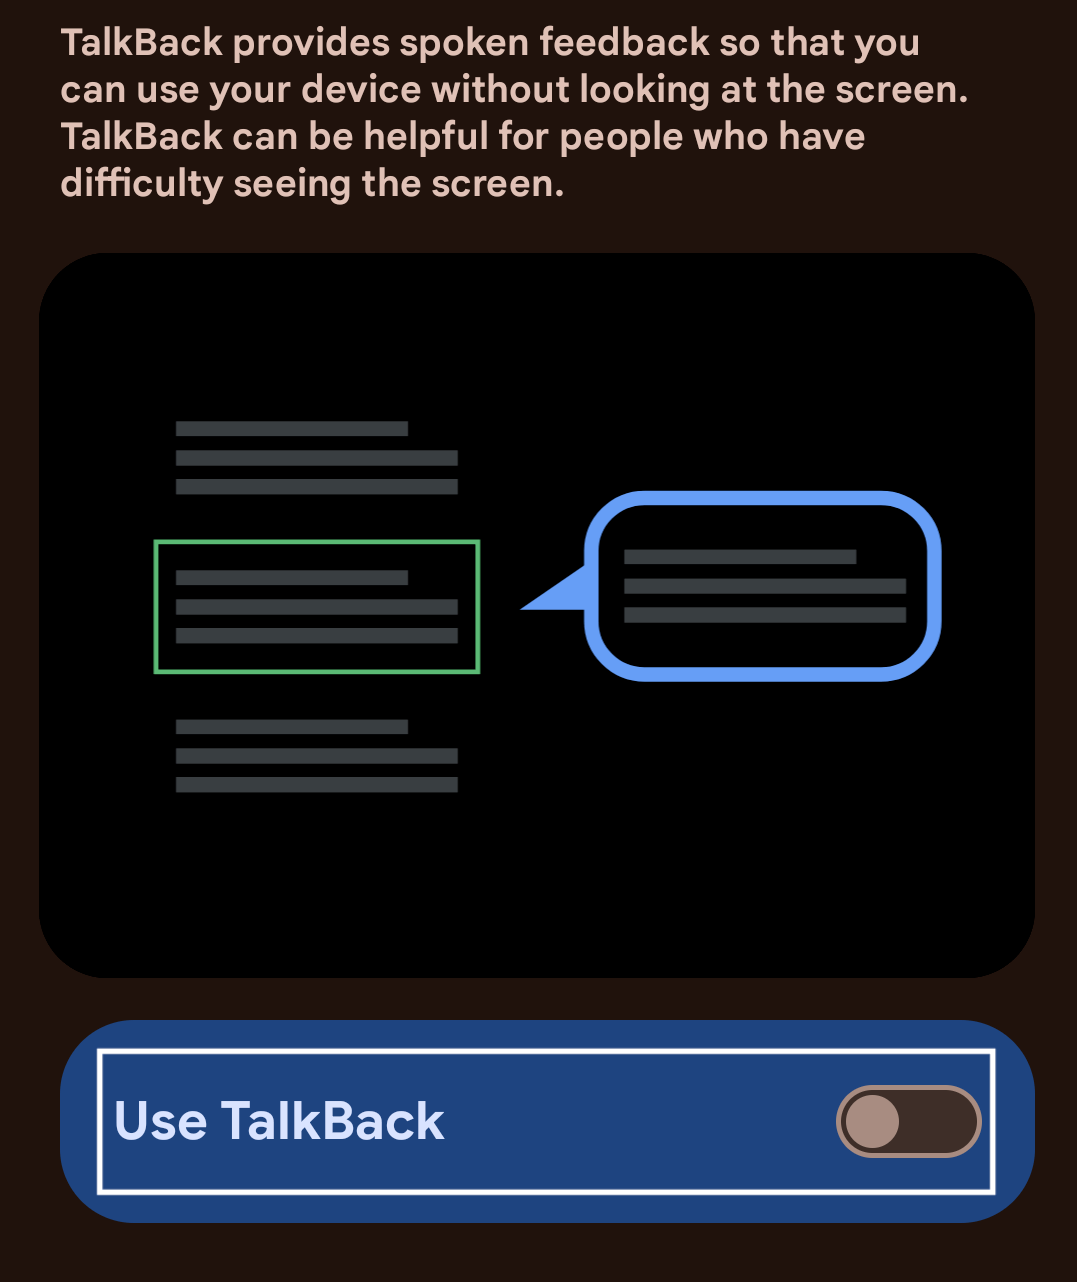 Screenshot of TalkBack settings on an Android phone. The Use TalkBack toggle is emphasized with a white box. Text states that TalkBack provides spoken feedback so that you can use your device without looking at the screen. TalkBack can be helpful for people who have difficulty seeing the screen.